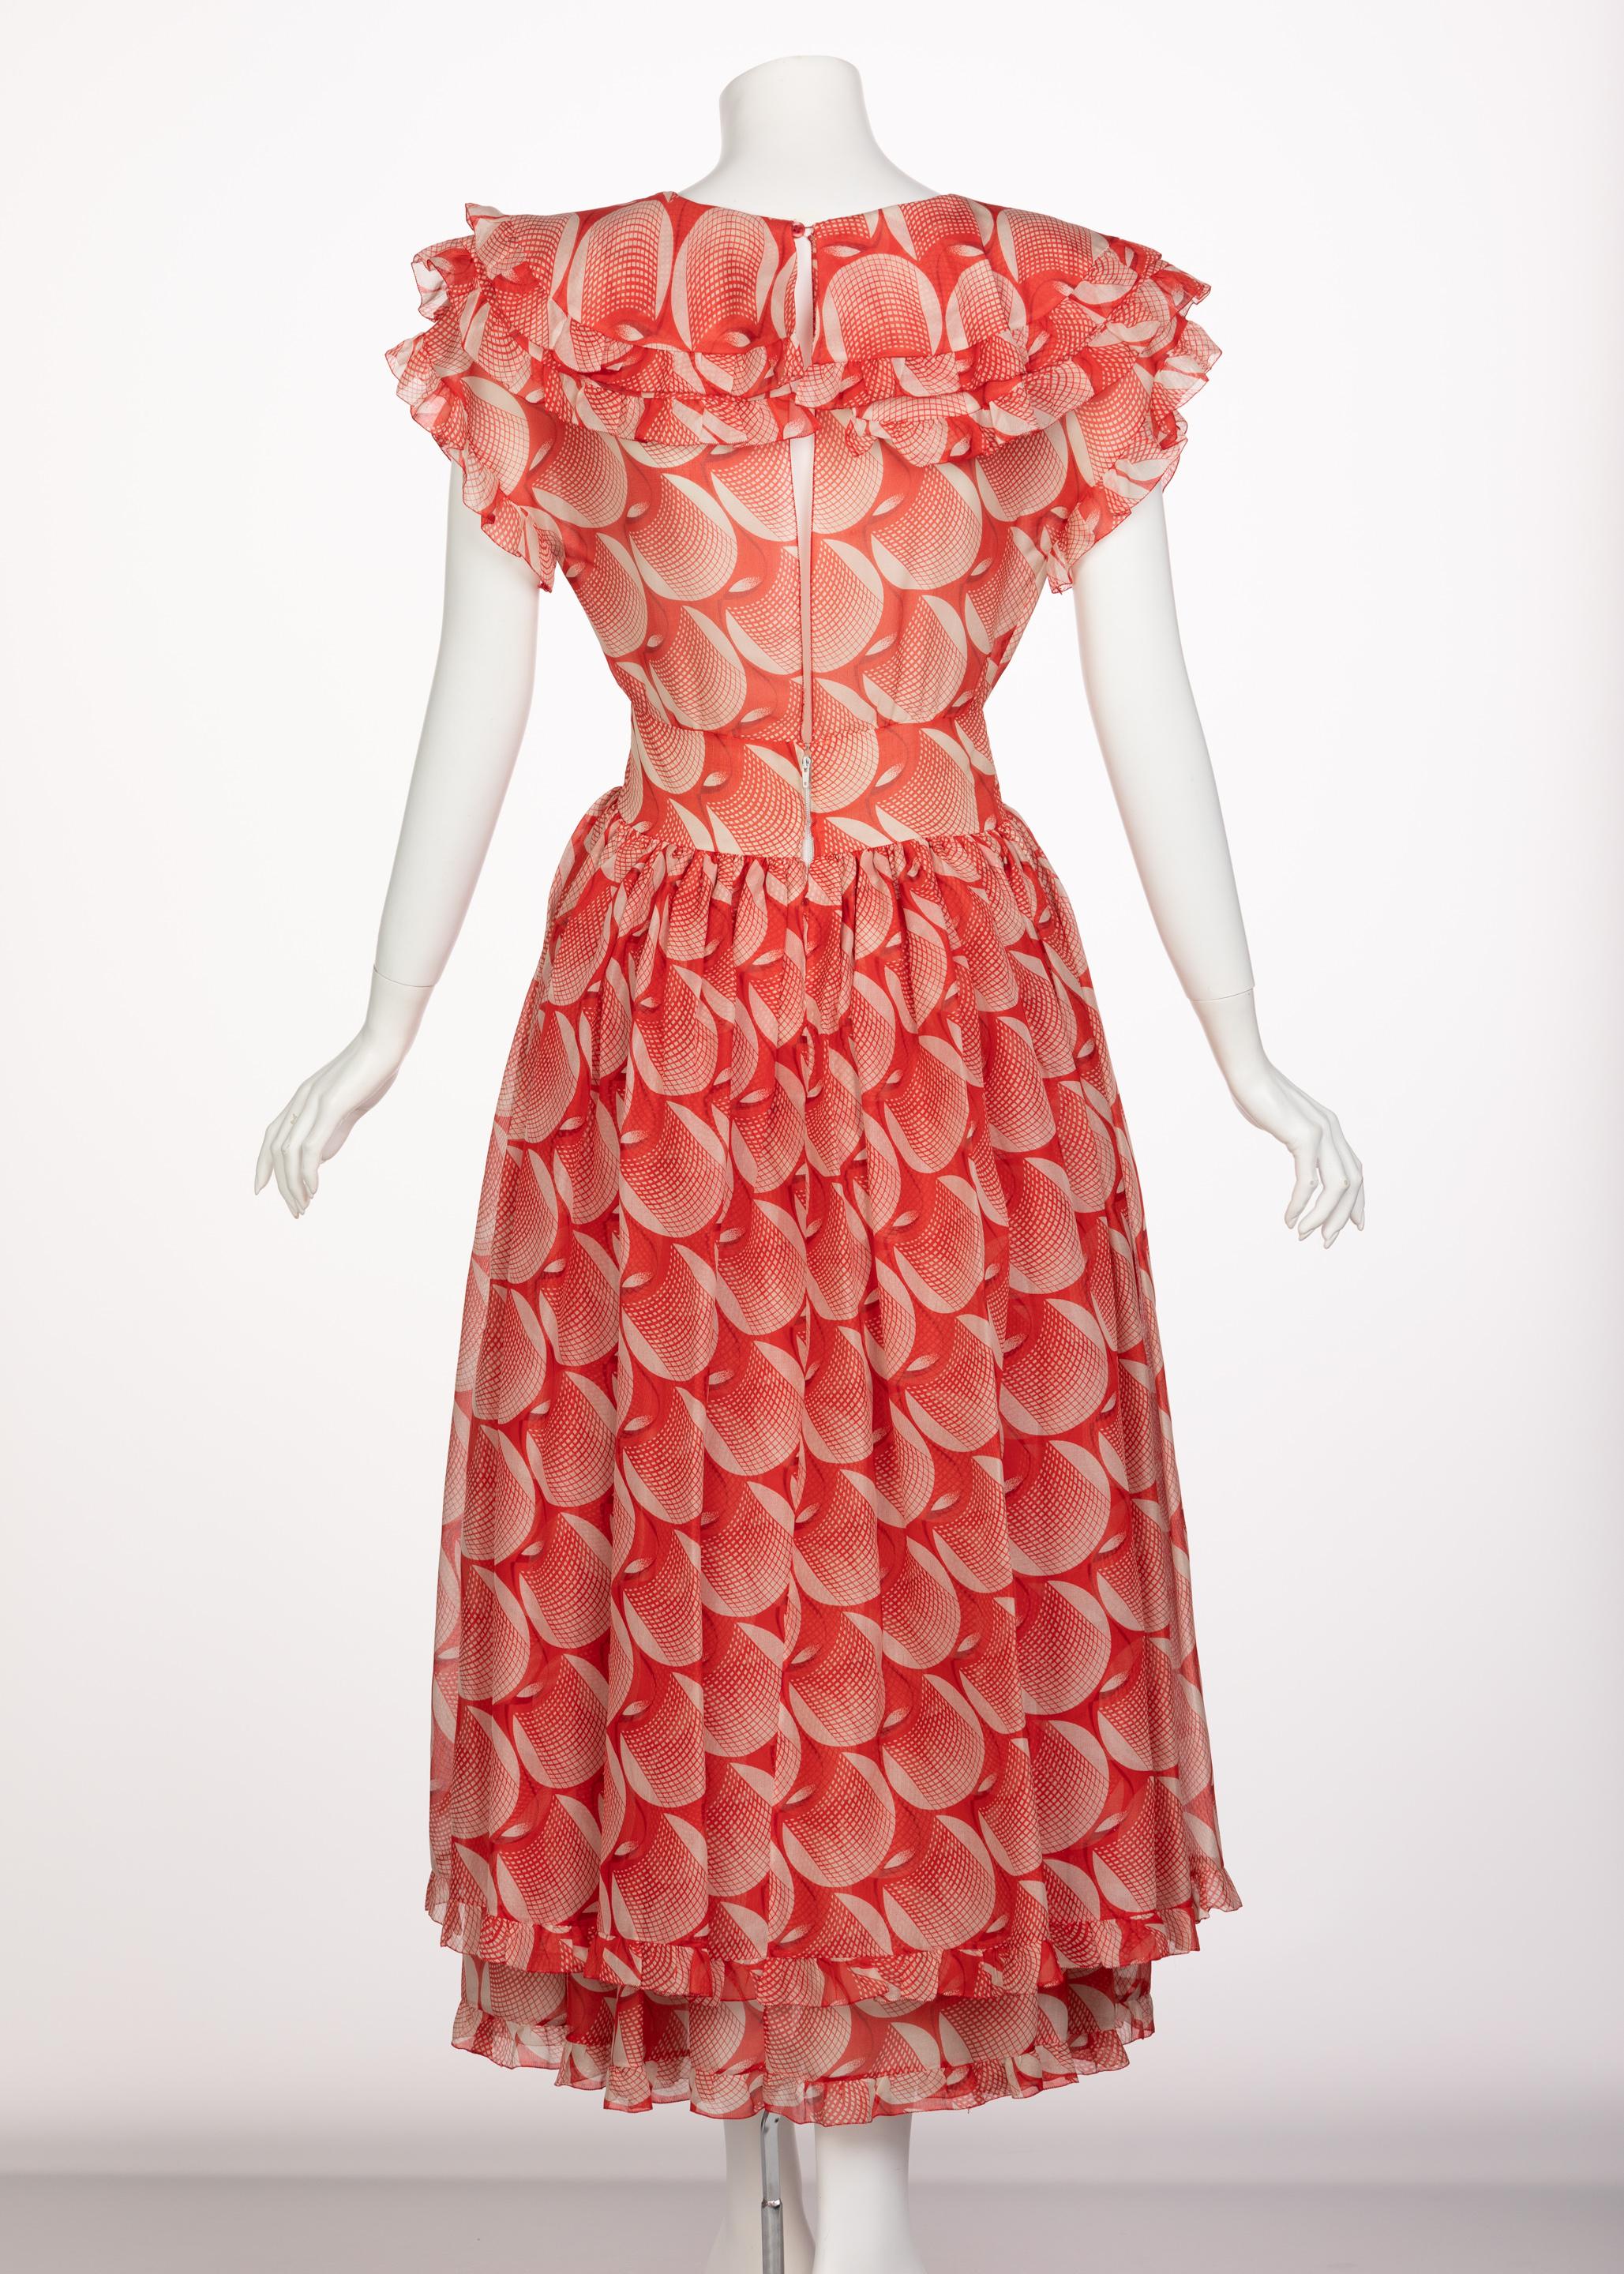 Chloe Karl Lagerfeld Red White Printed Silk Dress Runway 1982 In Excellent Condition In Boca Raton, FL